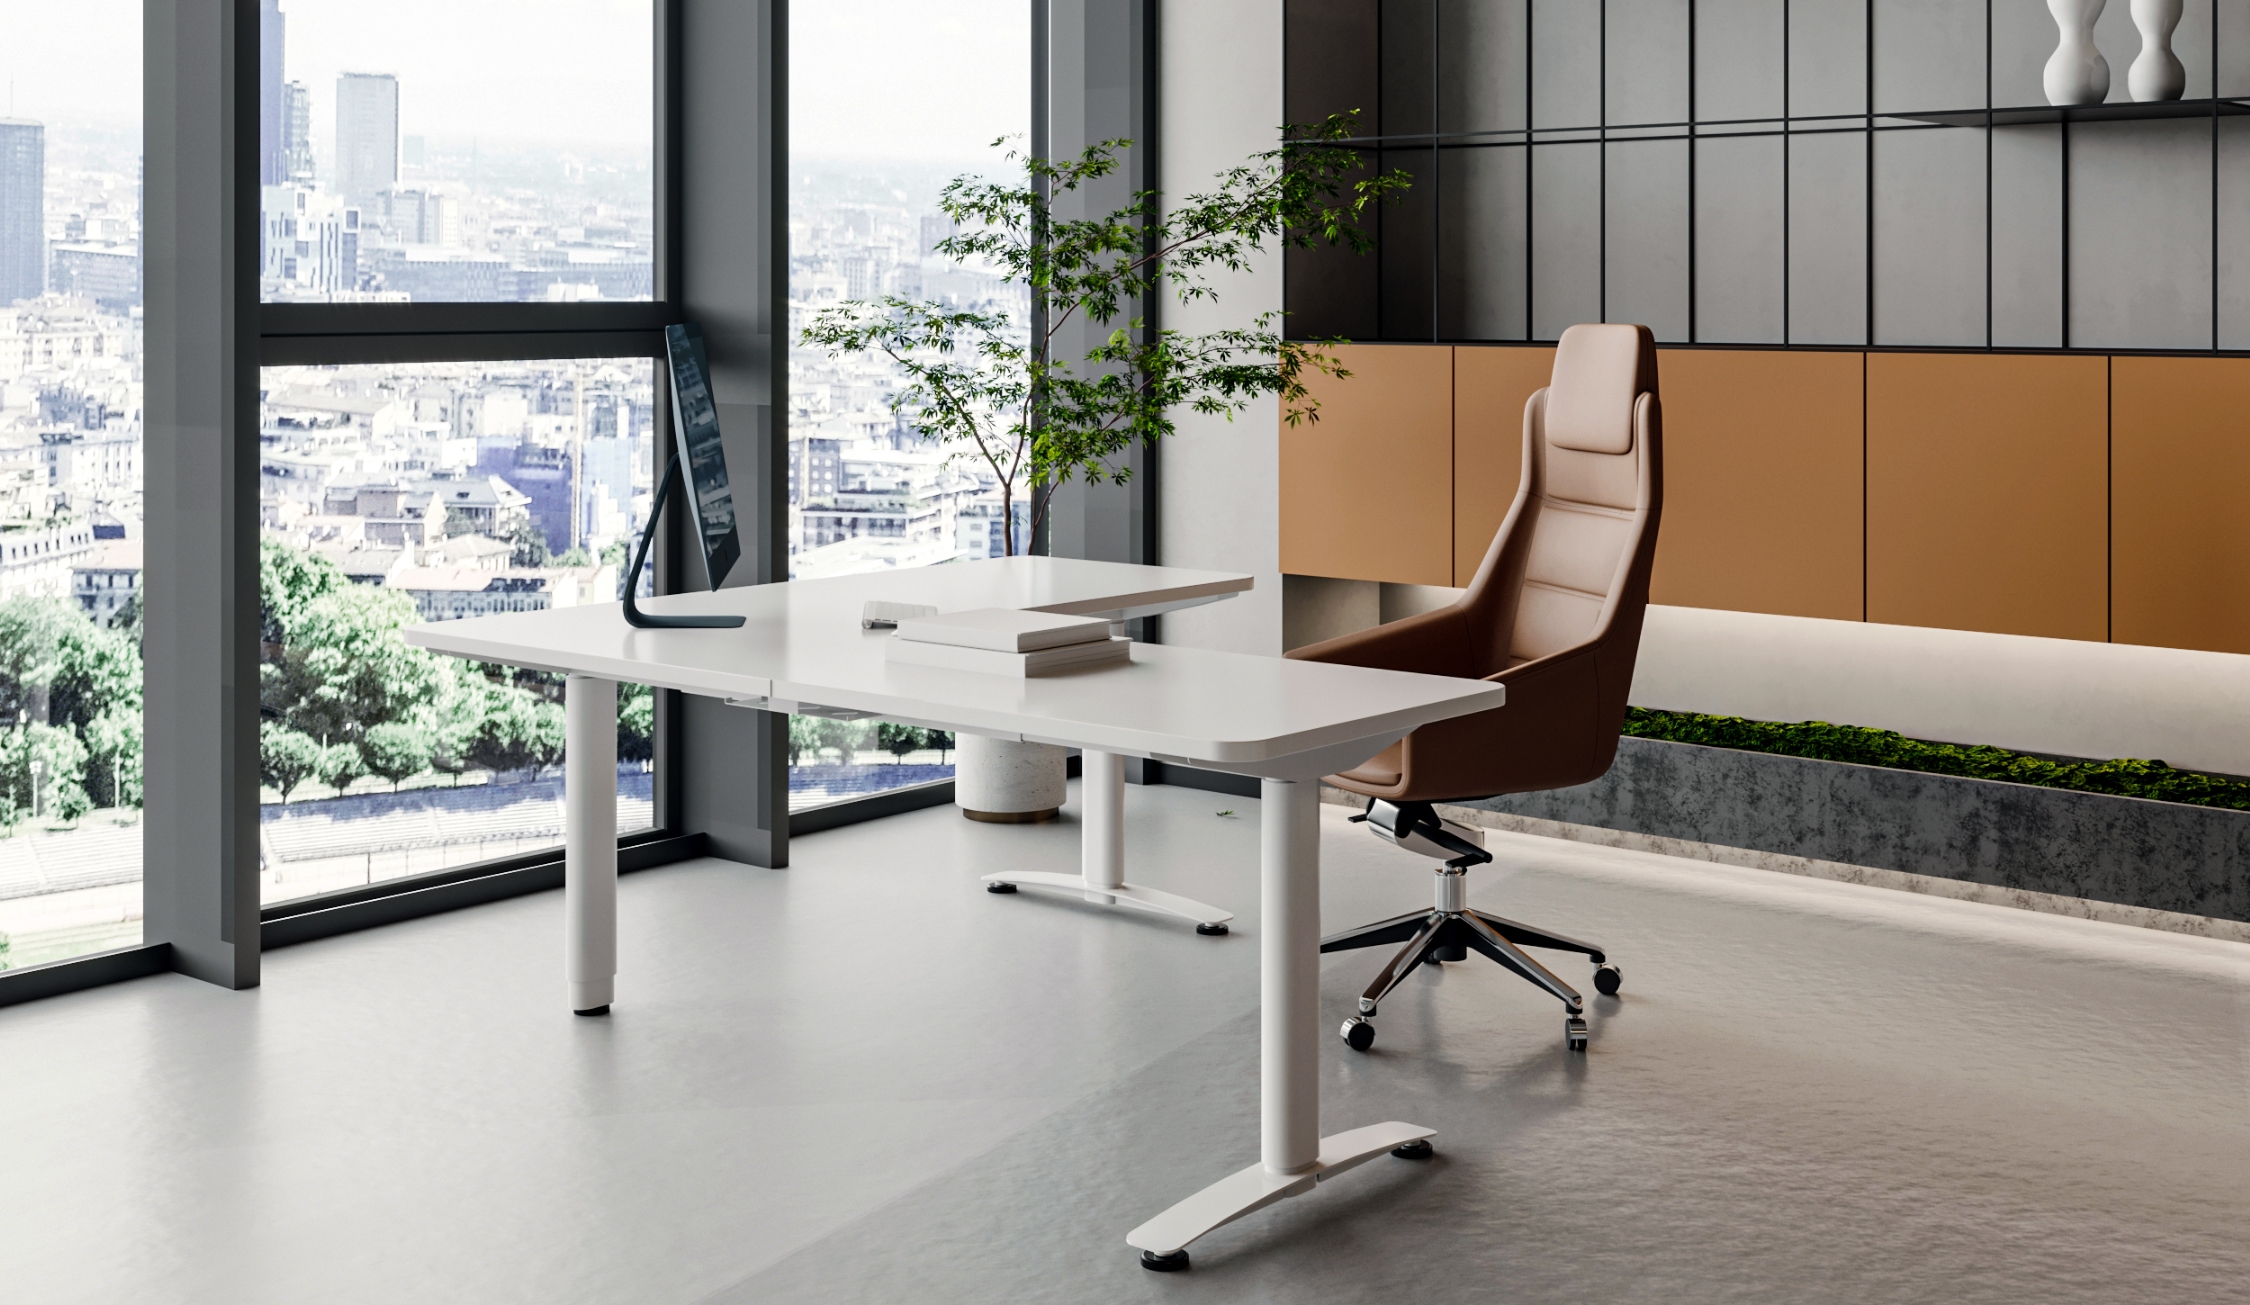 How Do Height Adjustable Tables Impact Productivity And Ergonomics?